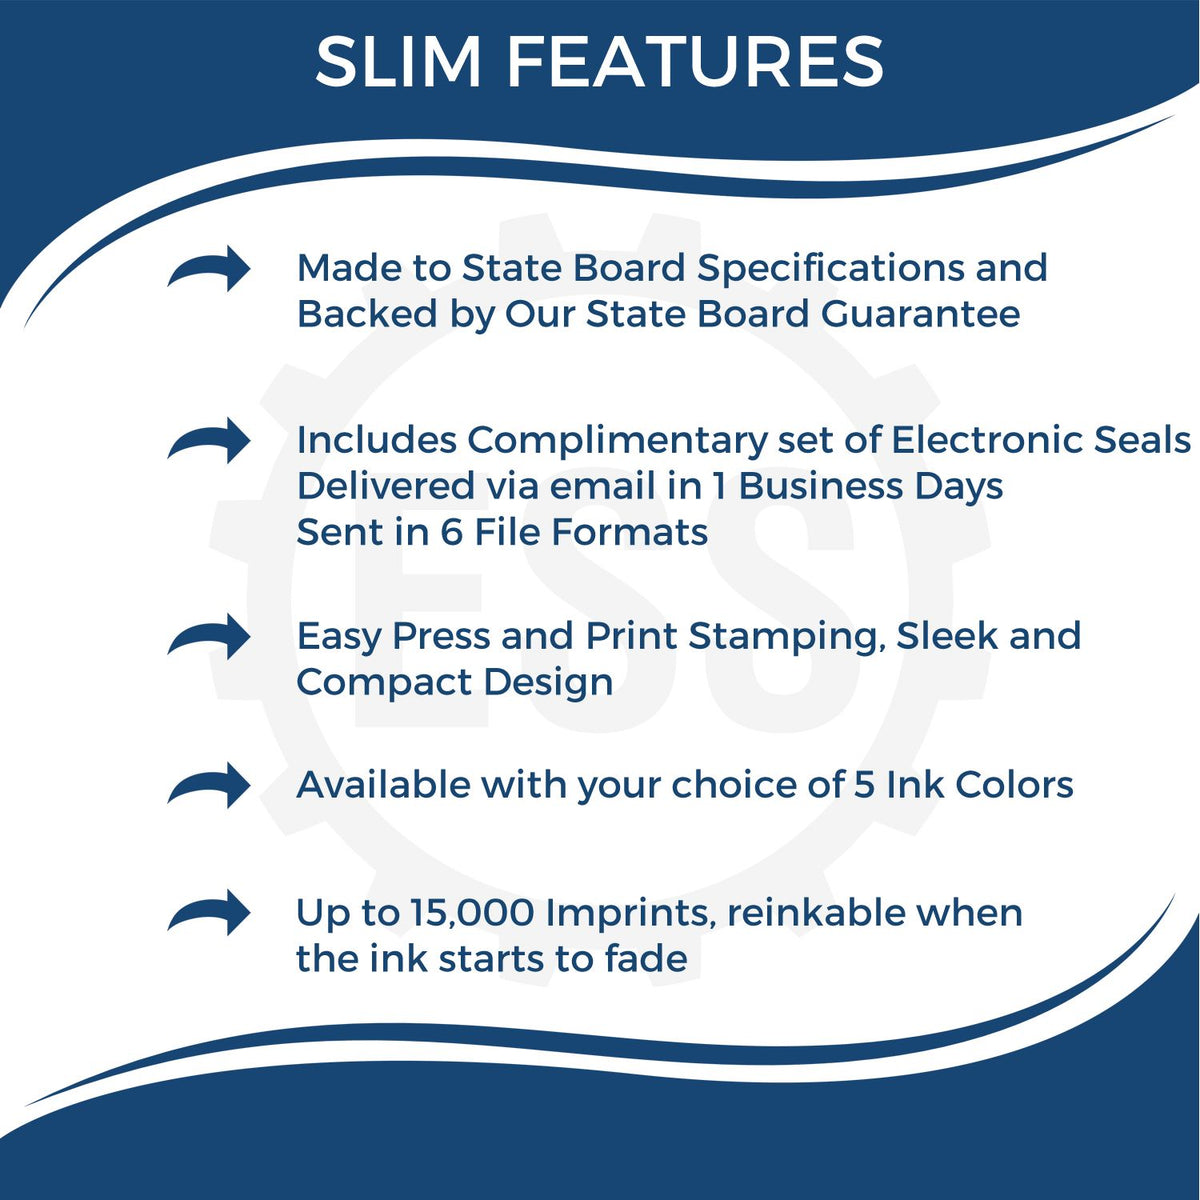 A picture of an infographic highlighting the selling points for the Slim Pre-Inked South Carolina Land Surveyor Seal Stamp